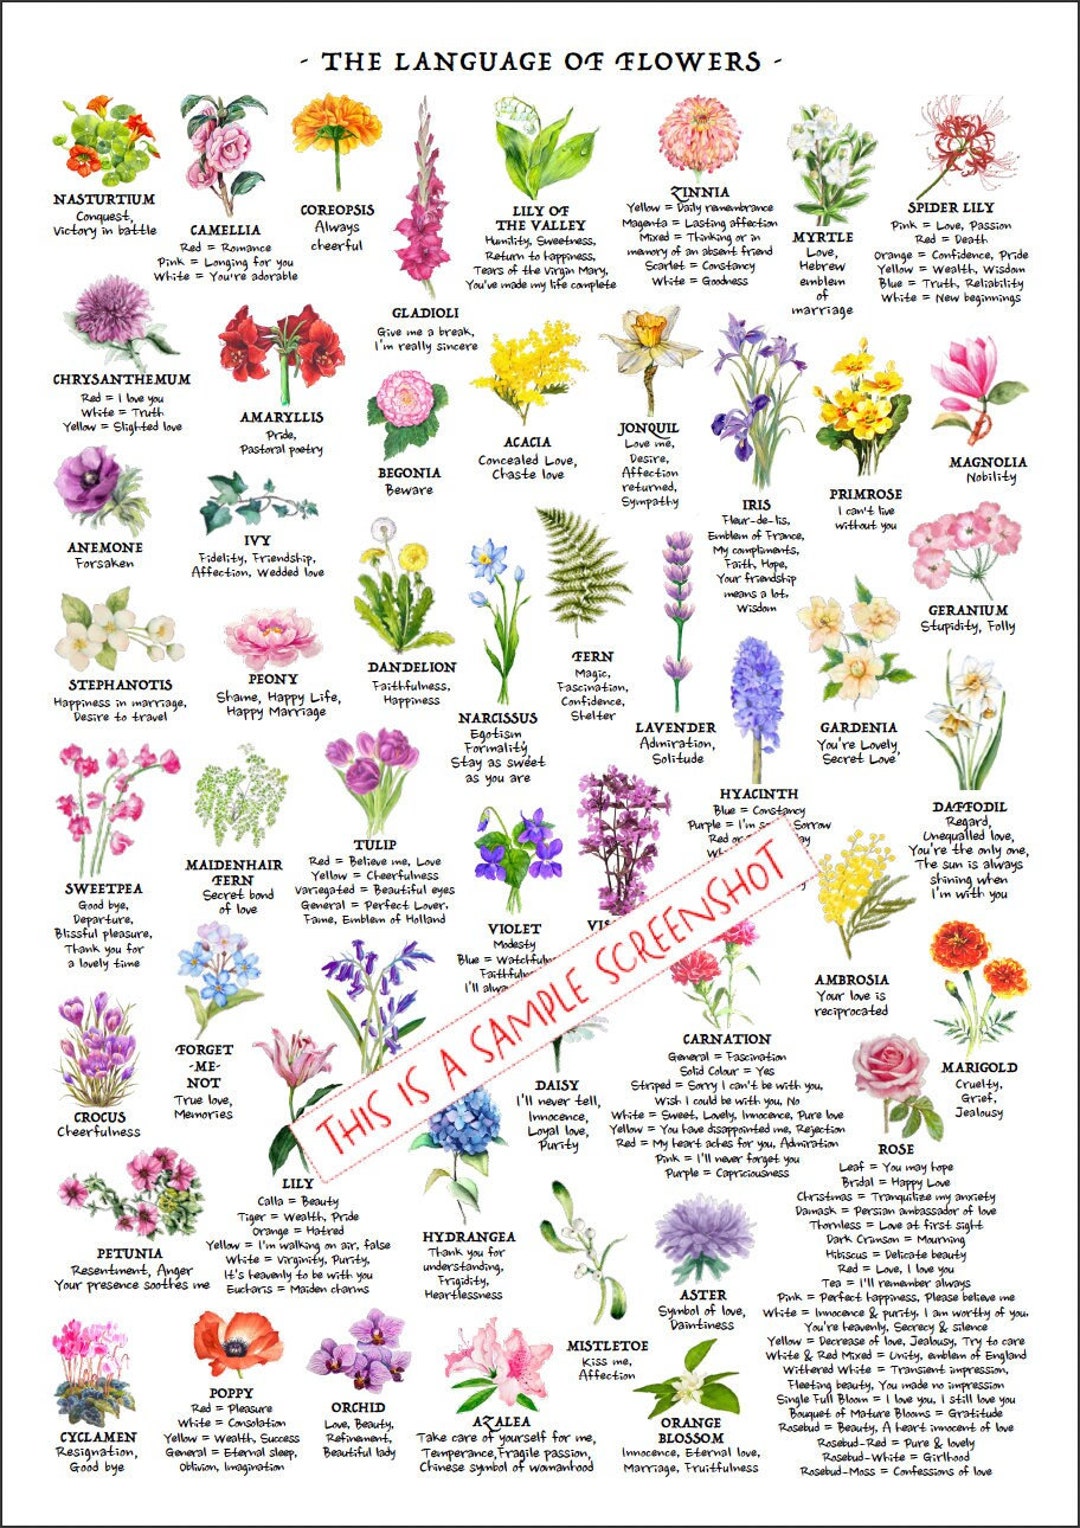 85 Surprising Flower Meanings - Flower Language and Symbolism